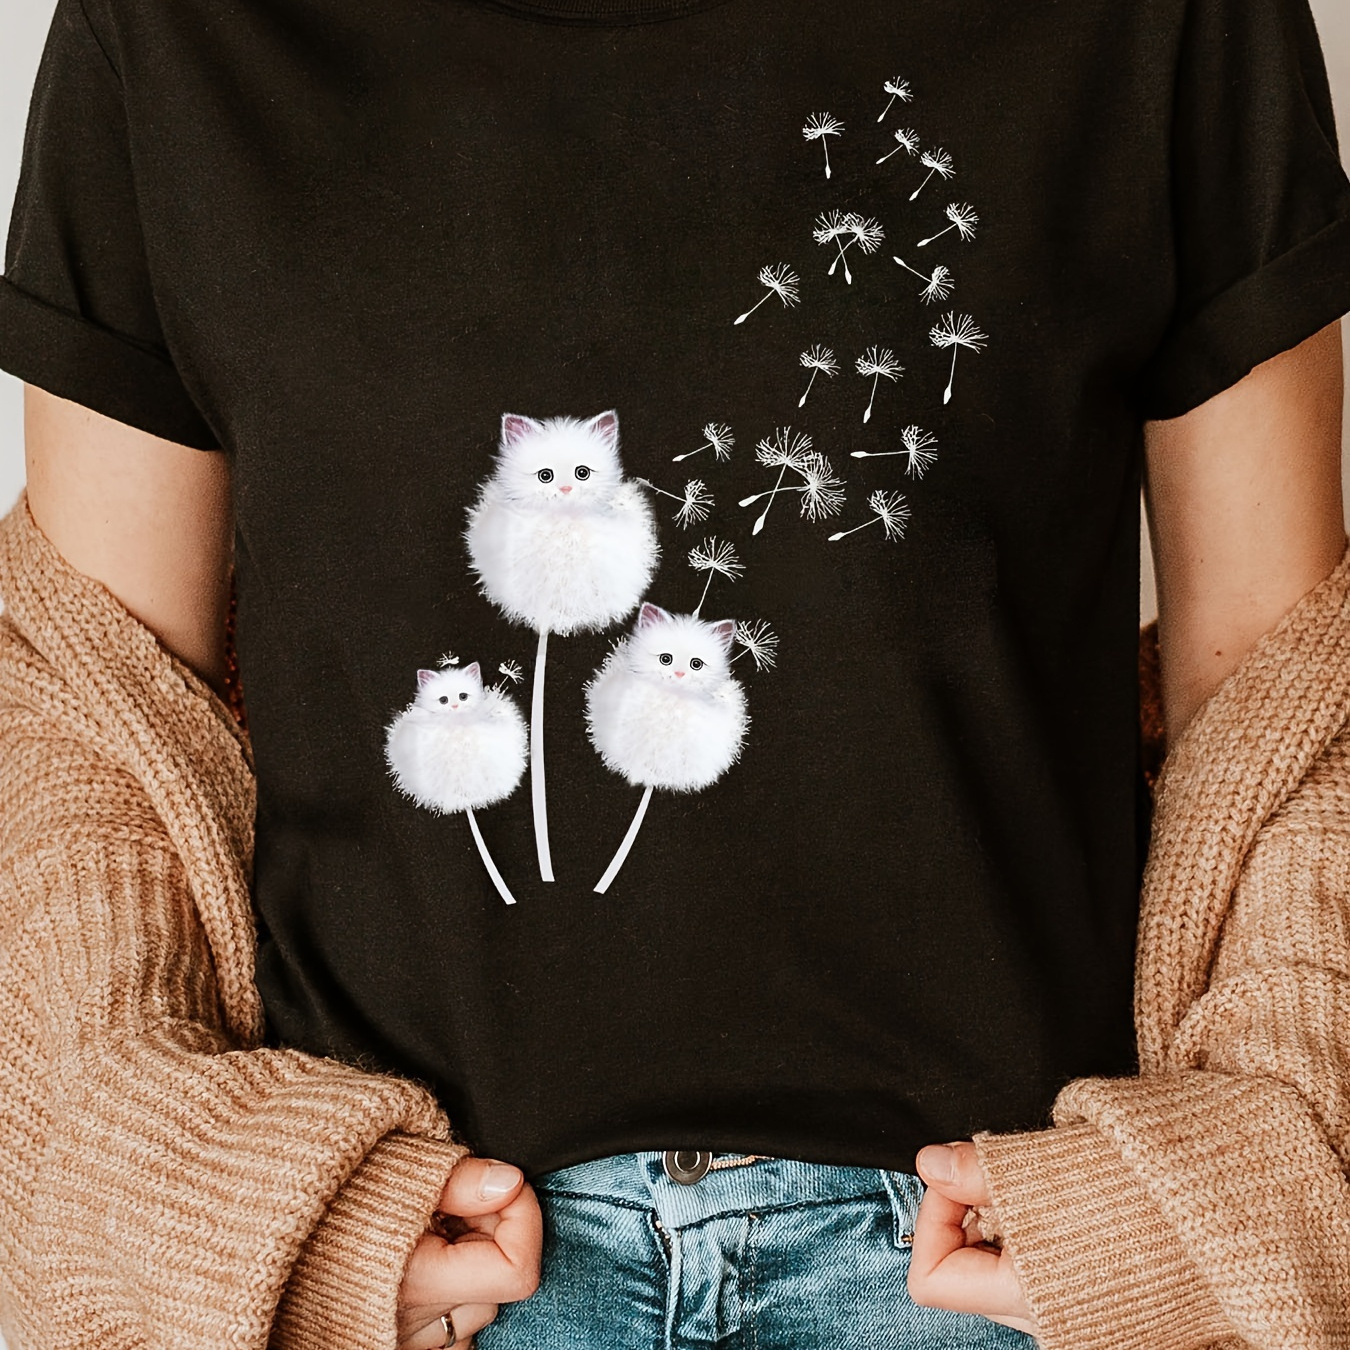 

Dandelion Print Crew Neck T-shirt, Short Sleeve Casual Top For Summer & Spring, Women's Clothing